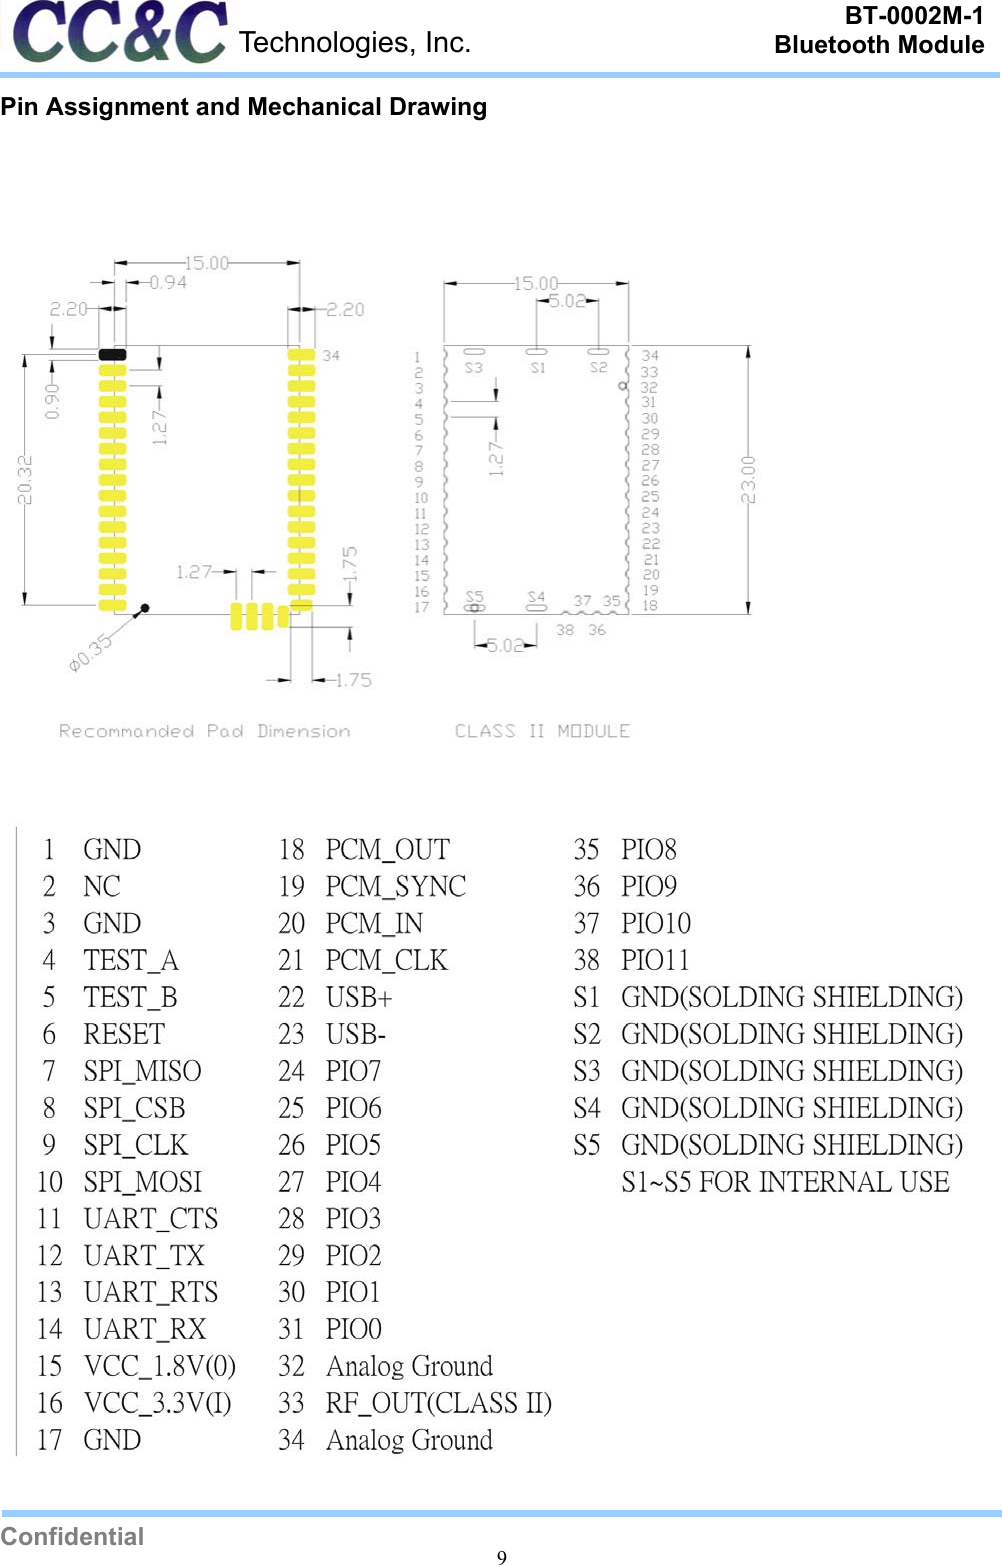 Confidential9Technologies, Inc.BT-0002M-1Bluetooth ModulePin Assignment and Mechanical Drawing